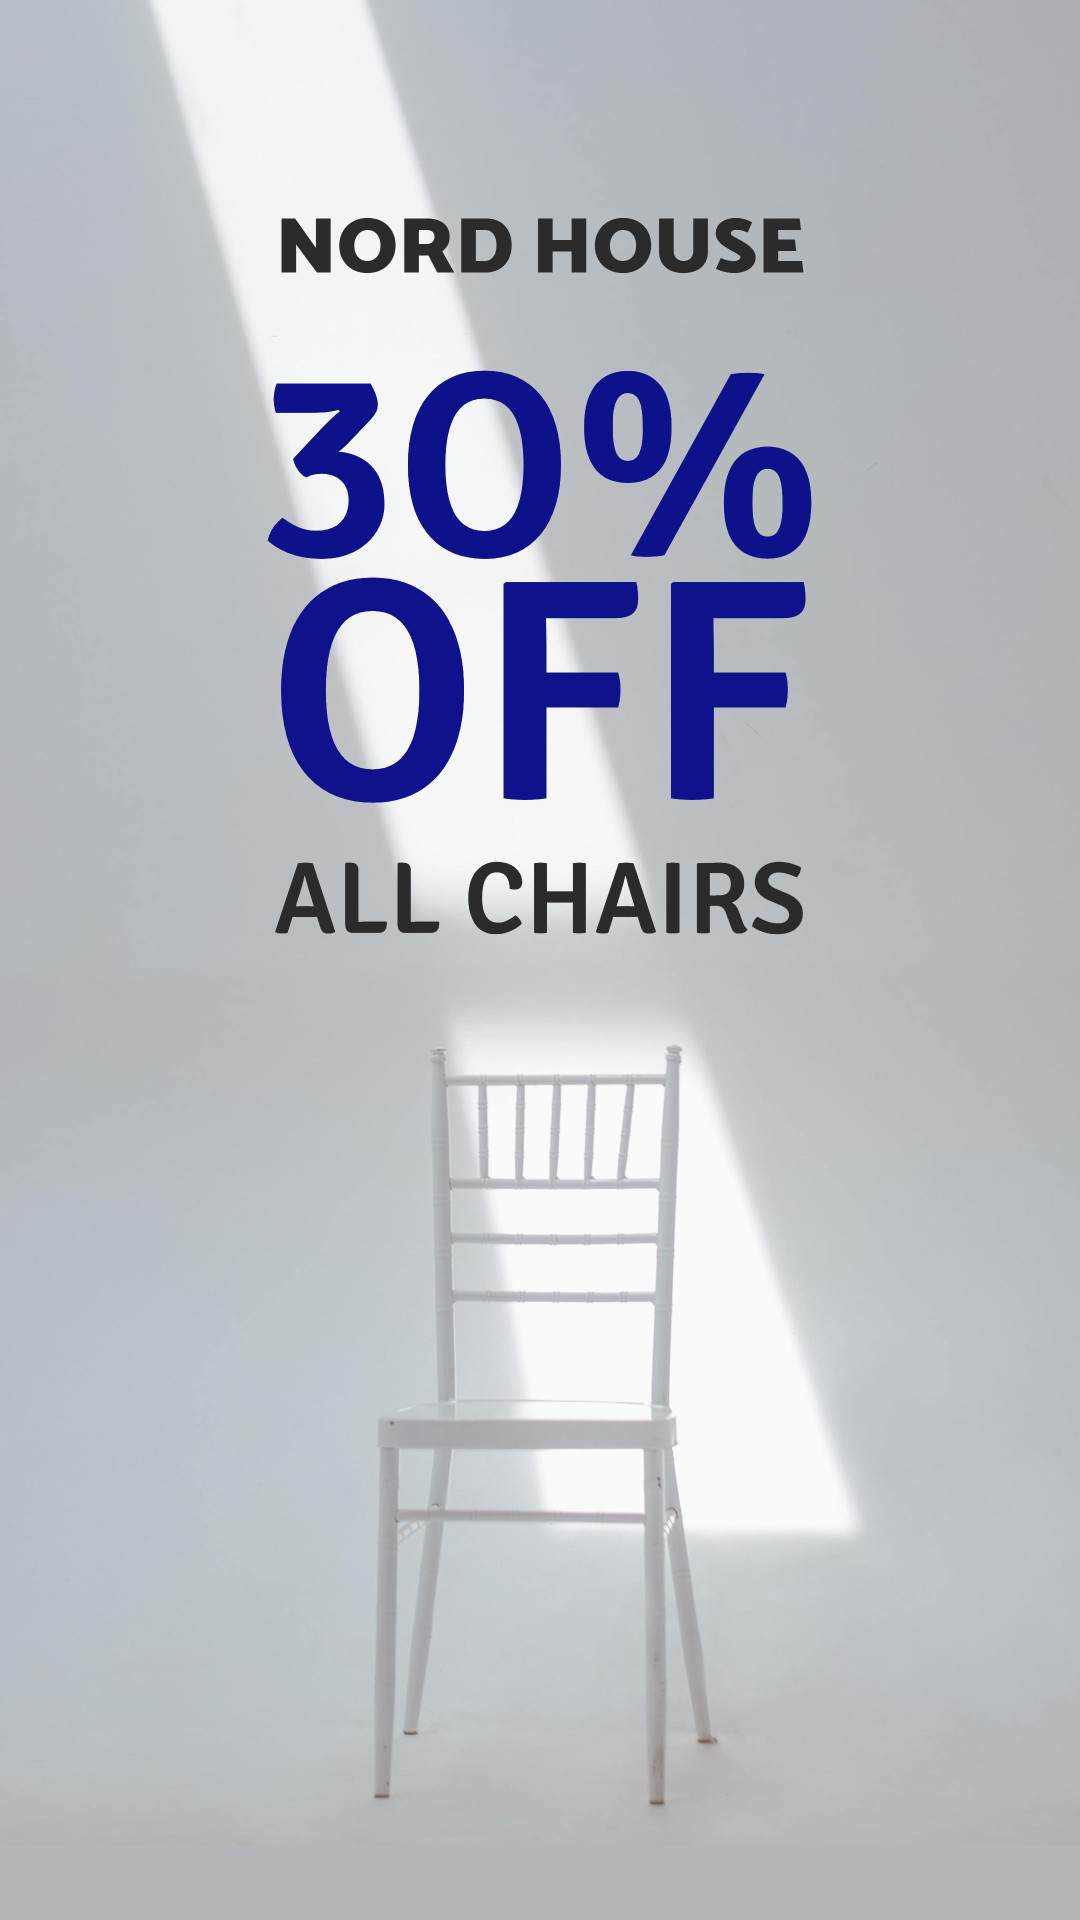 Nord house - 30% off all chairs